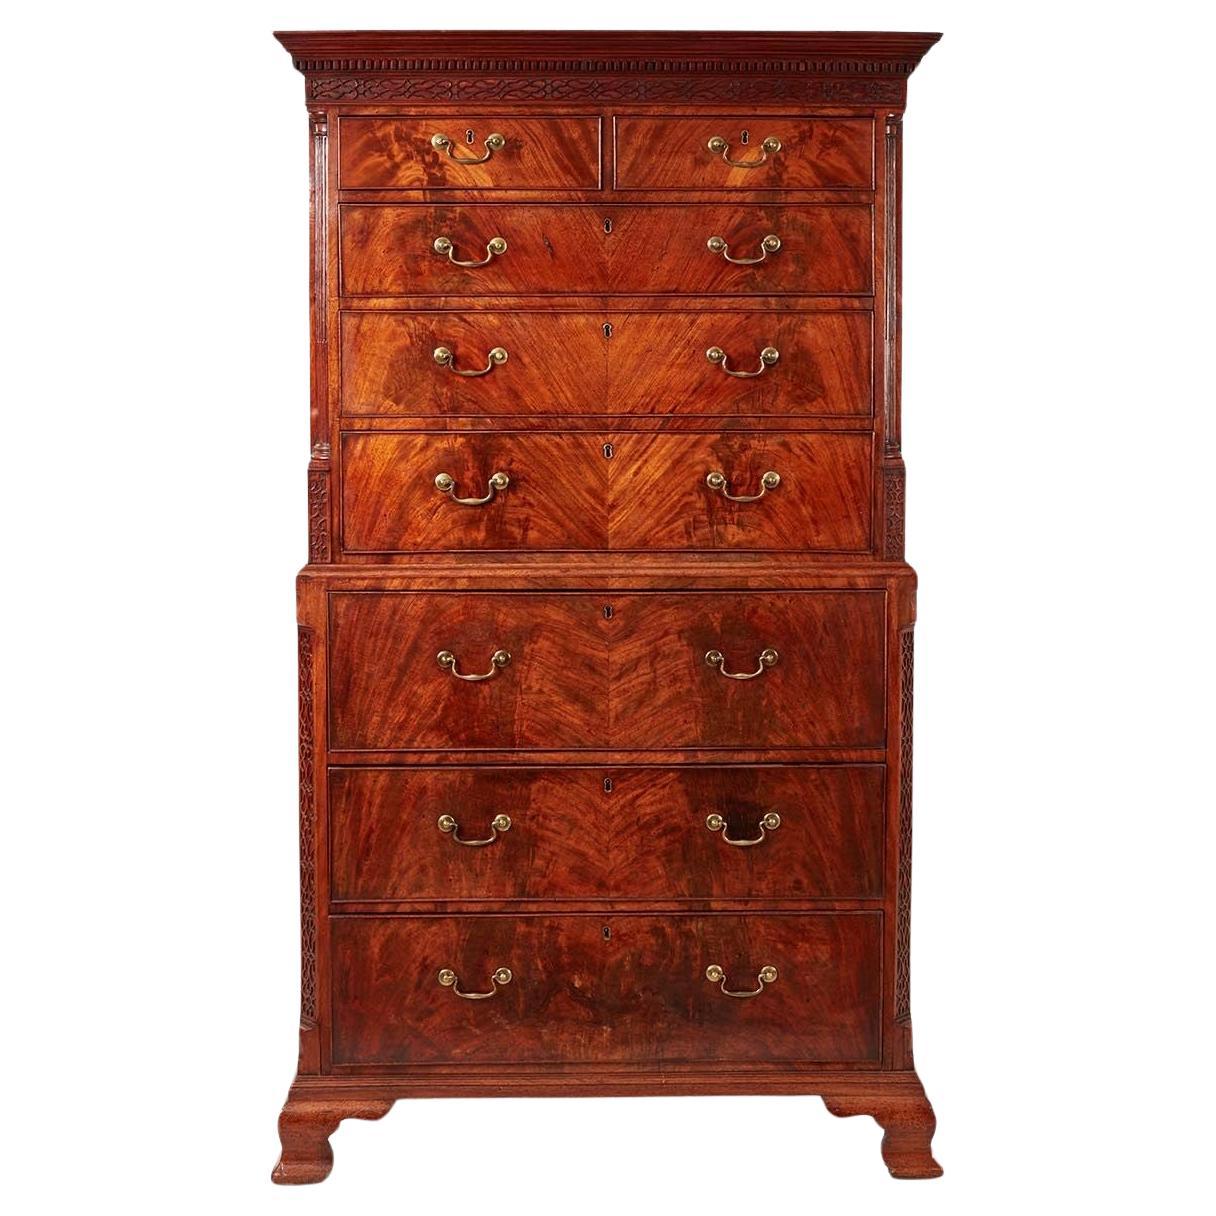 1760s Case Pieces and Storage Cabinets